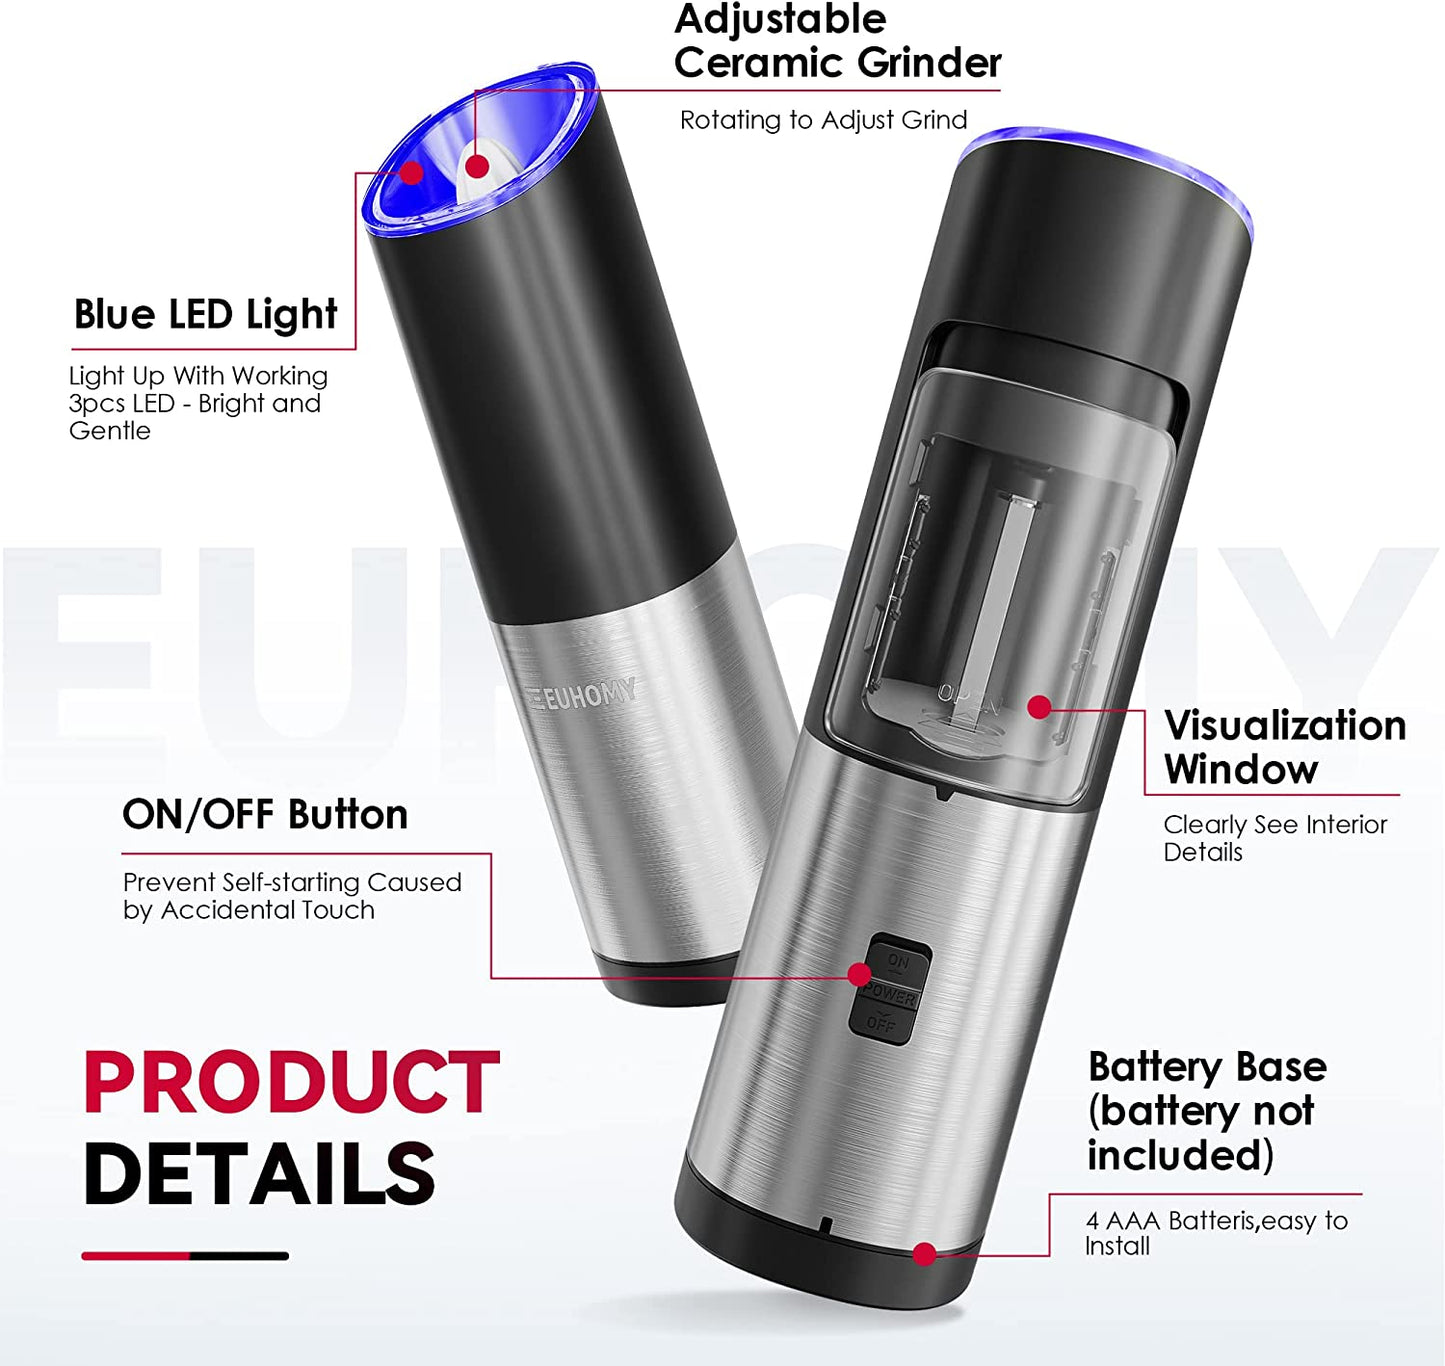 Euhomy Gravity Electric Salt and Pepper Grinder Set, Automatic Pepper Grinder and Salt Mill Battery Powered, LED Light, Adjustable Coarseness, One Hand Operated Pepper Grinder with Safety Switch.